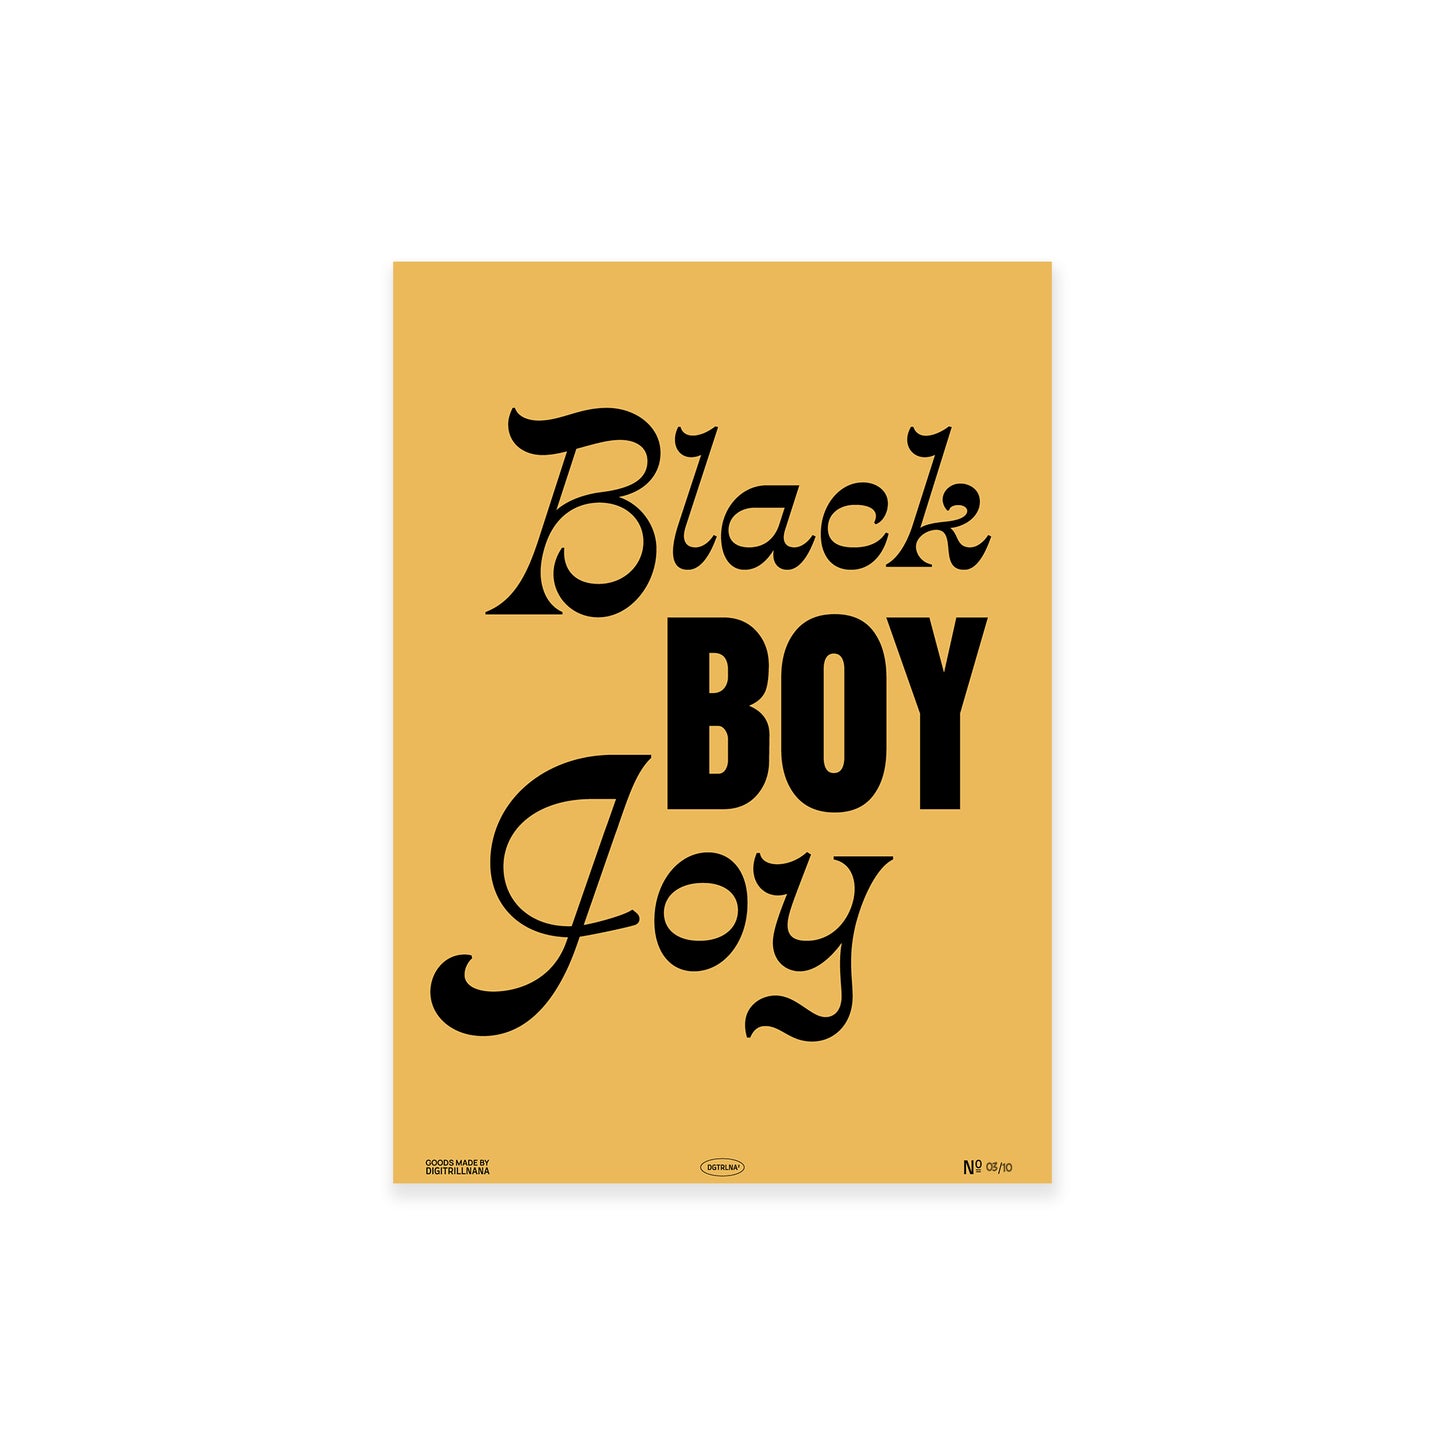 Black Boy Joy 5x7” typography inspirational quote art print  from Goods Made By Digitrillnana, Ashley Fletcher. Art for Black Men. Perfect for home decor, wall art, art prints, and more! Black Woman Owned.